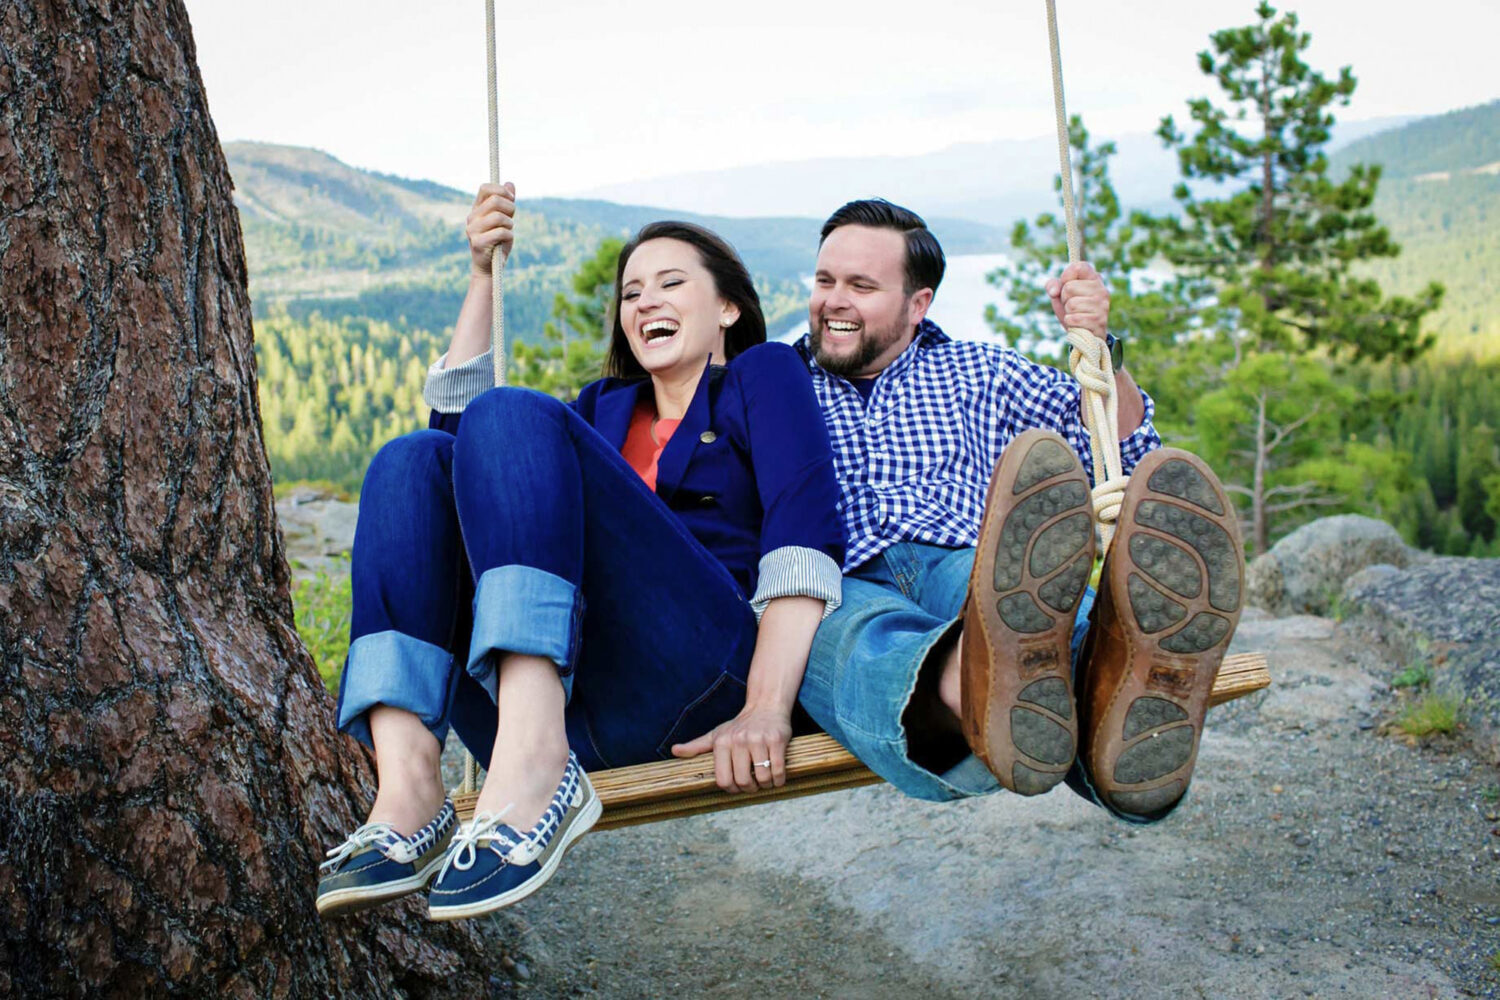 A couple enjoys a moment on the wooden swing on Old Highway 40 above Donner Lake.